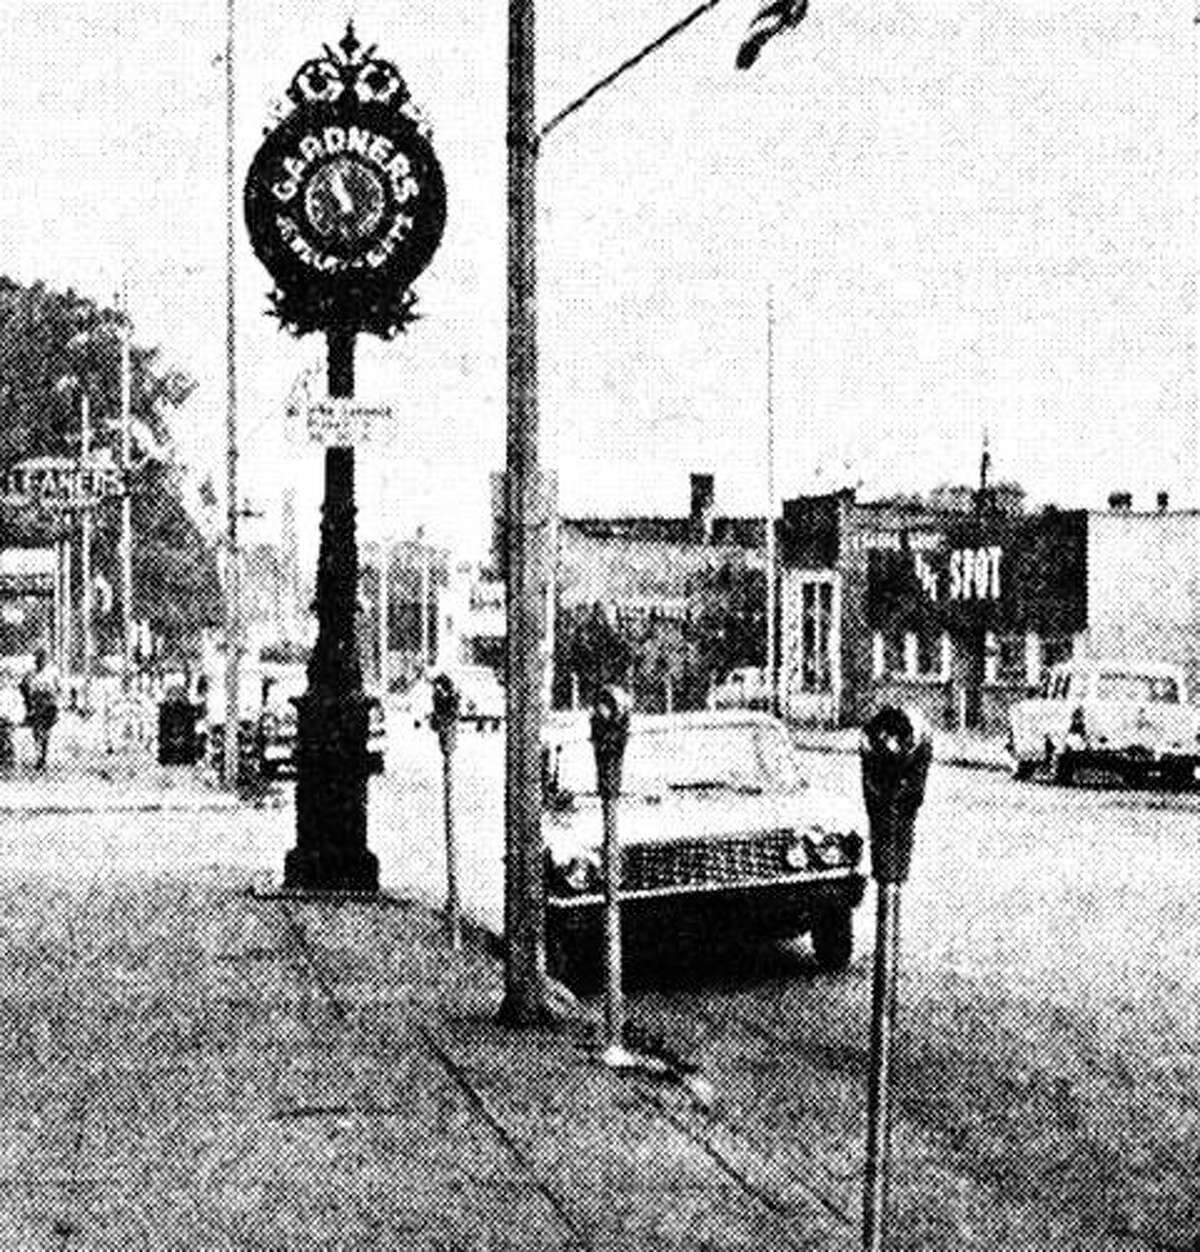 In the 1960s it was common to see parking meters lining River Street as people were required to pay a fee to park in the downtown area of face the possibility of getting a parking ticket.